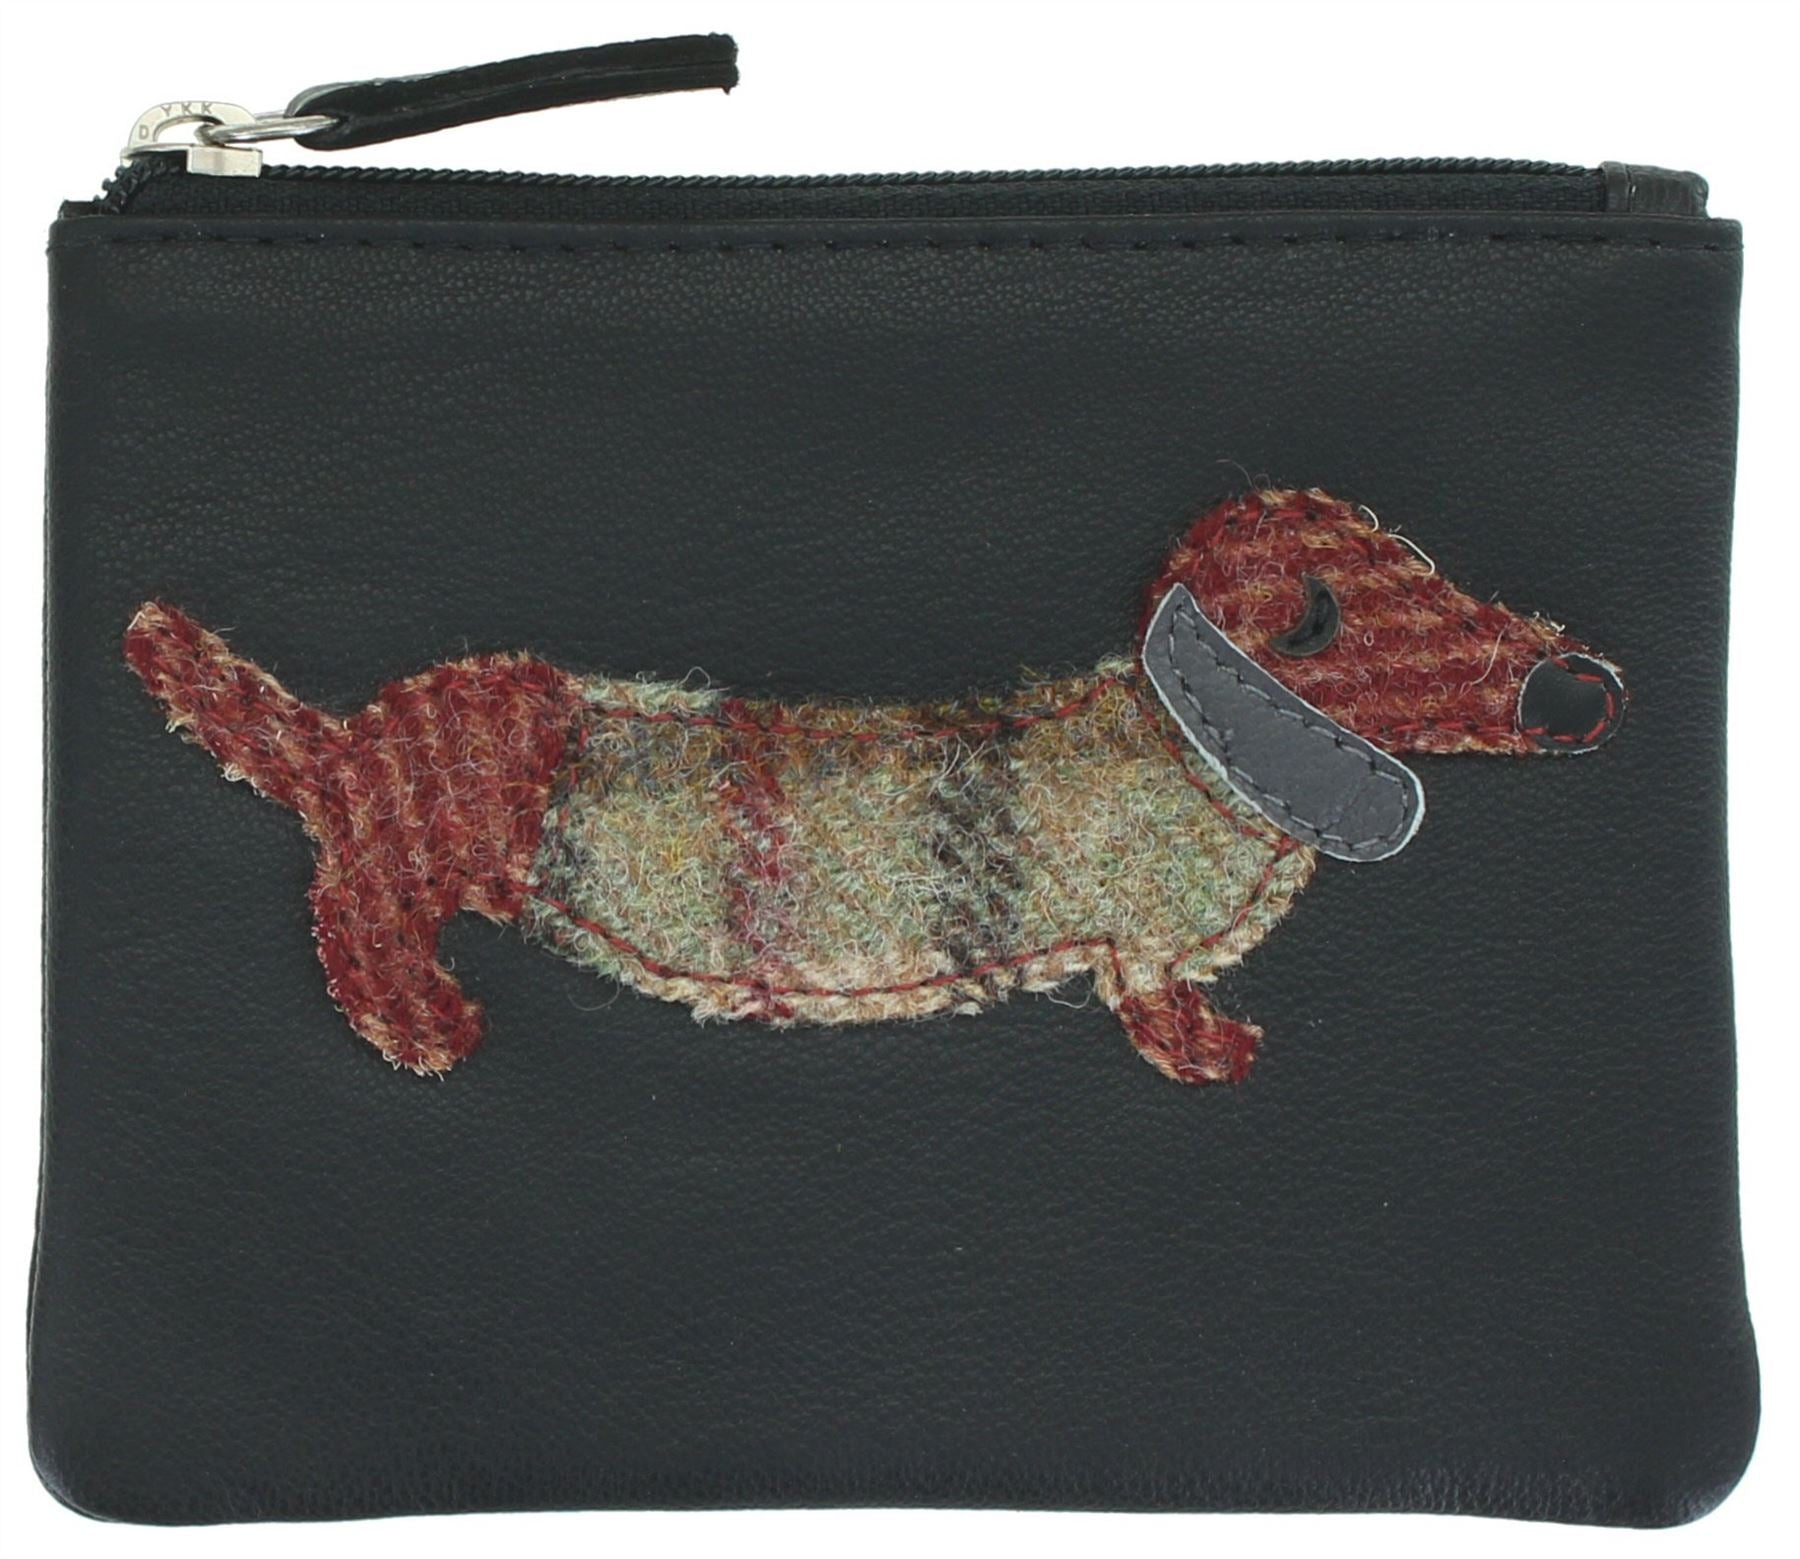 Mala Leather Wishaw Collection Leather Coin Purse RFID